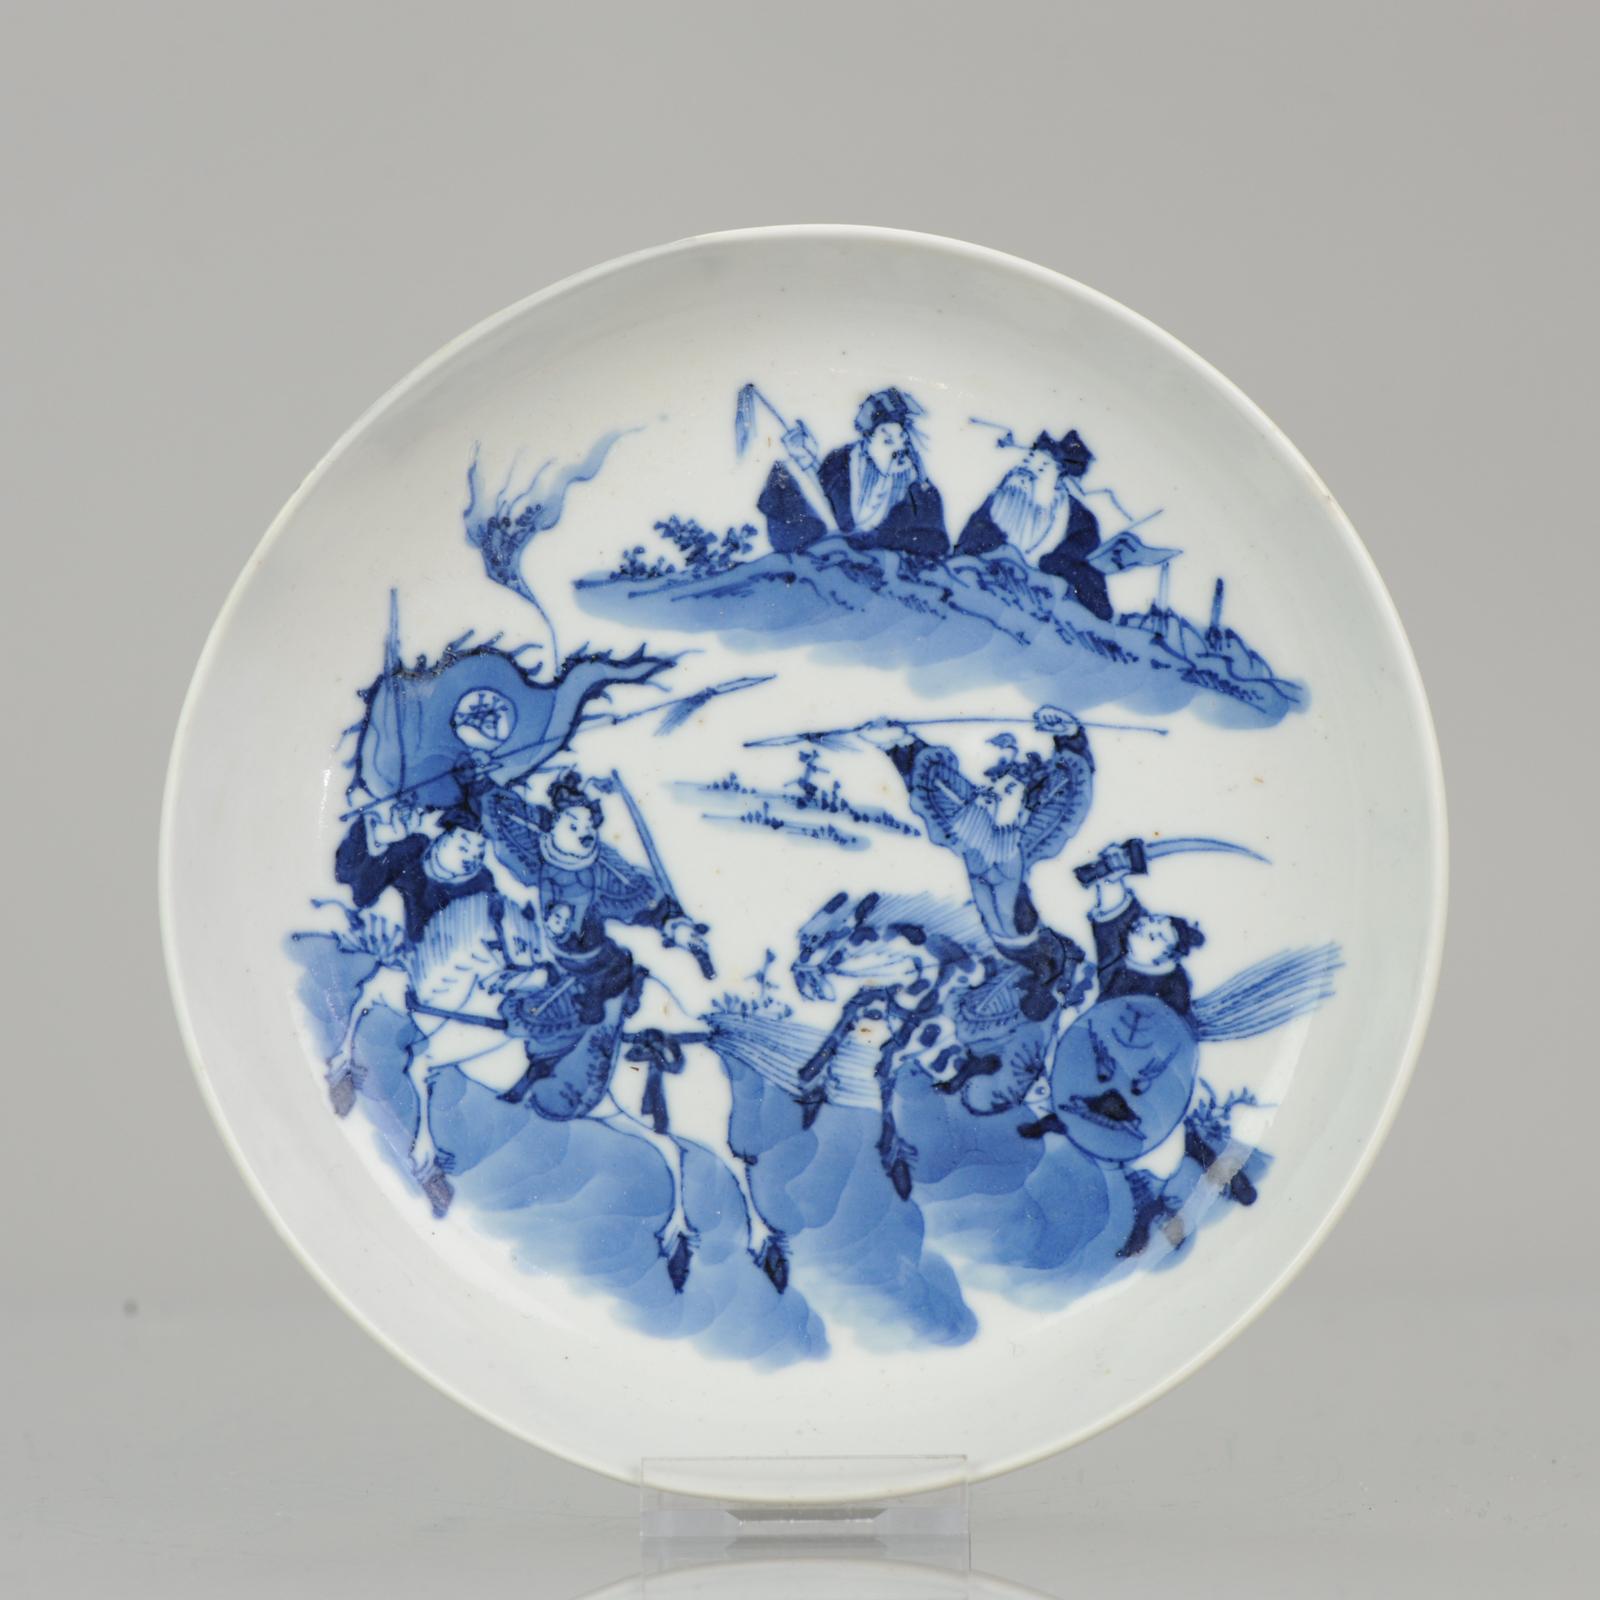 Description

A top quality small dish, Bleu de Hue porcelain. Central scene of 4 warriors in fighting position. 2 of them on horses, 2 walking. The left one is carrying a flag with some text. Above are two wise men watching the scene behind a